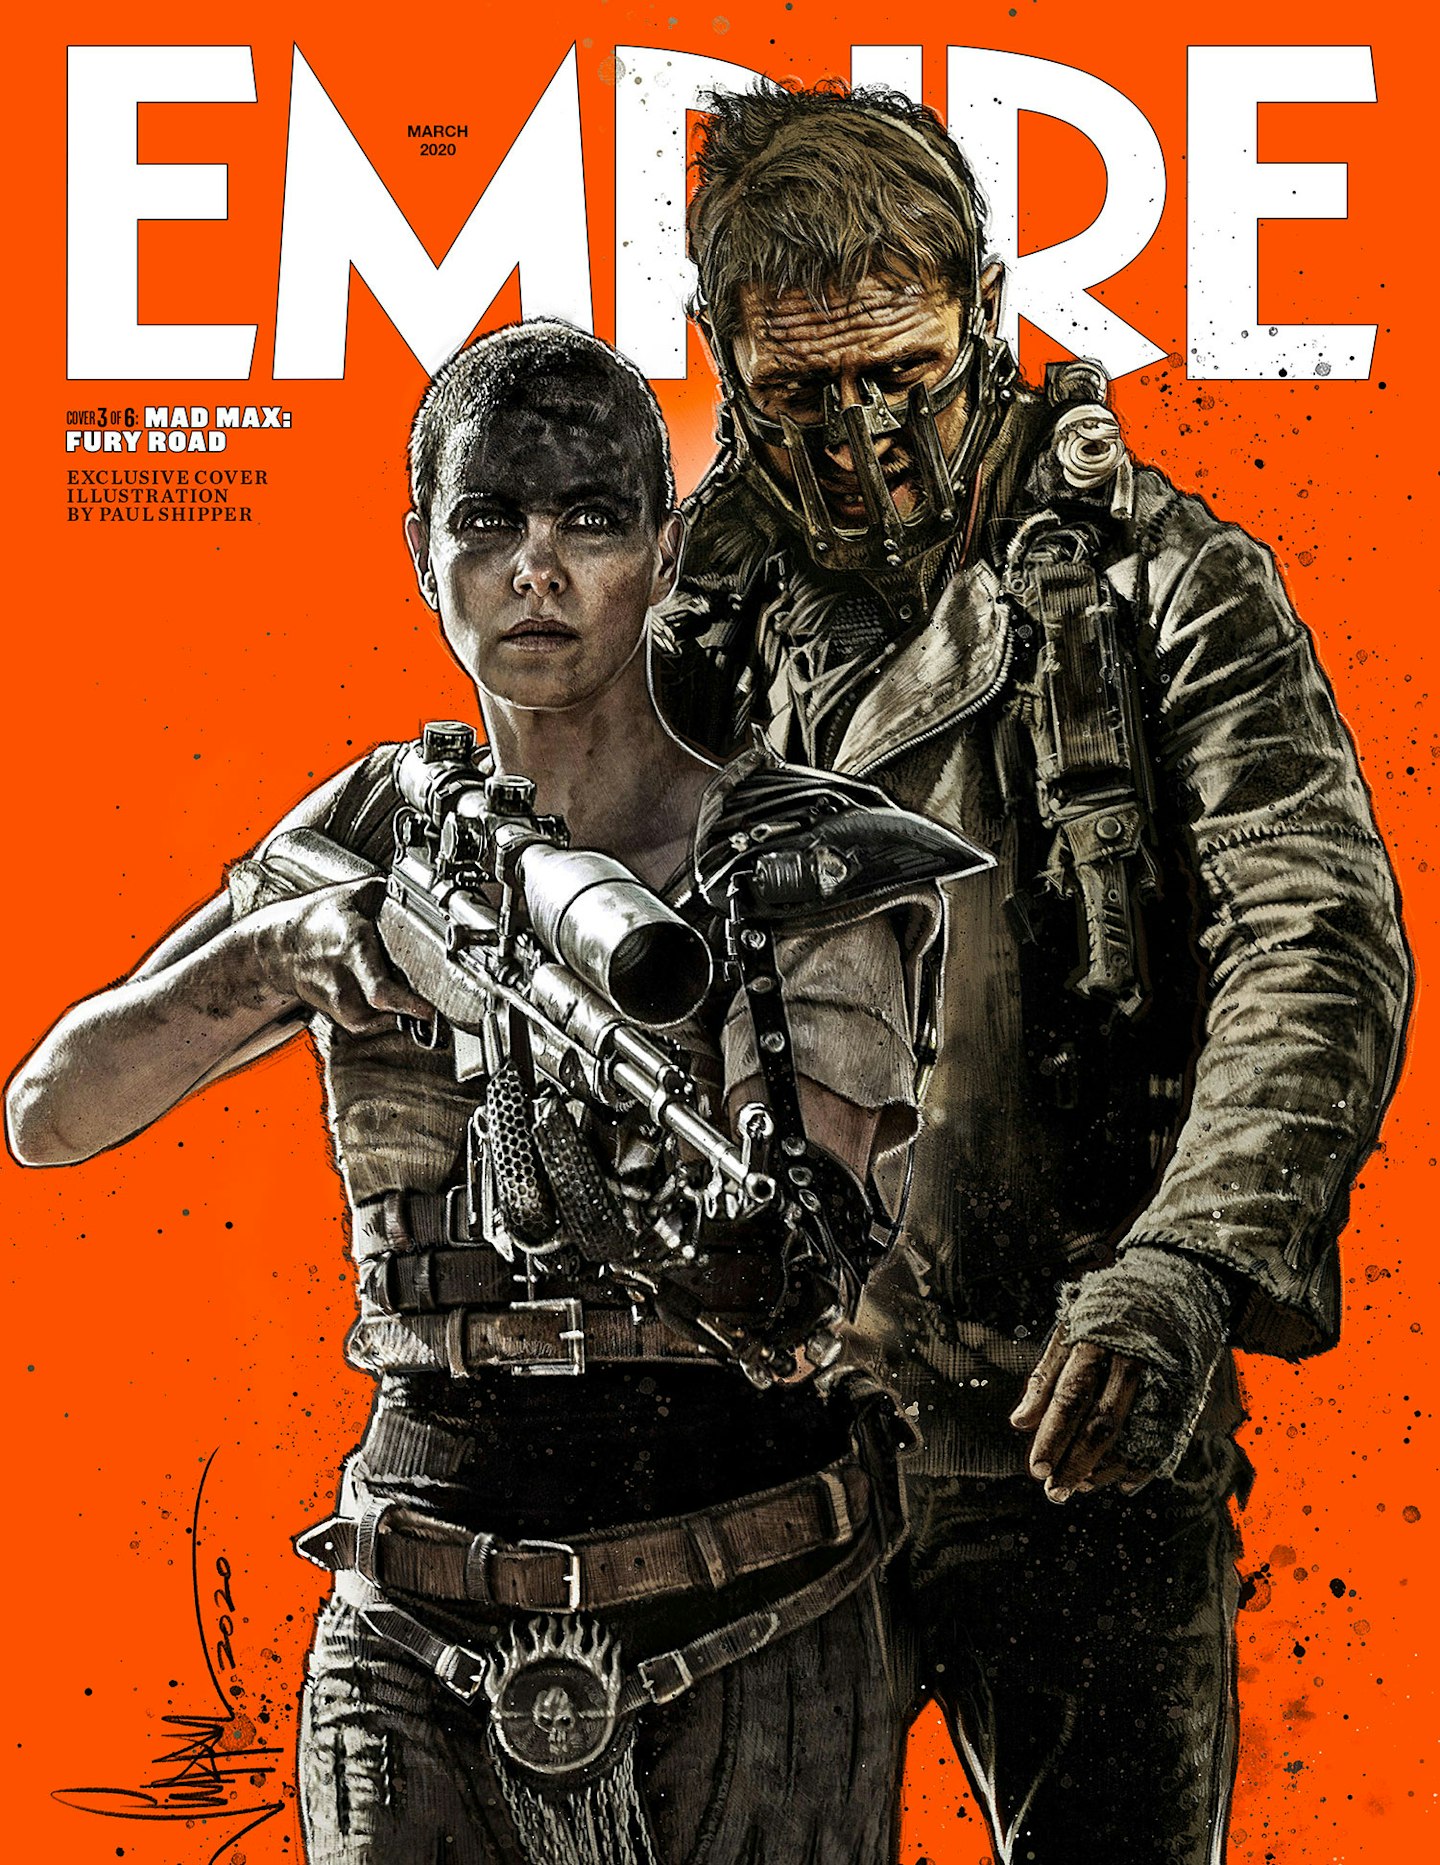 Empire – March 2020 covers